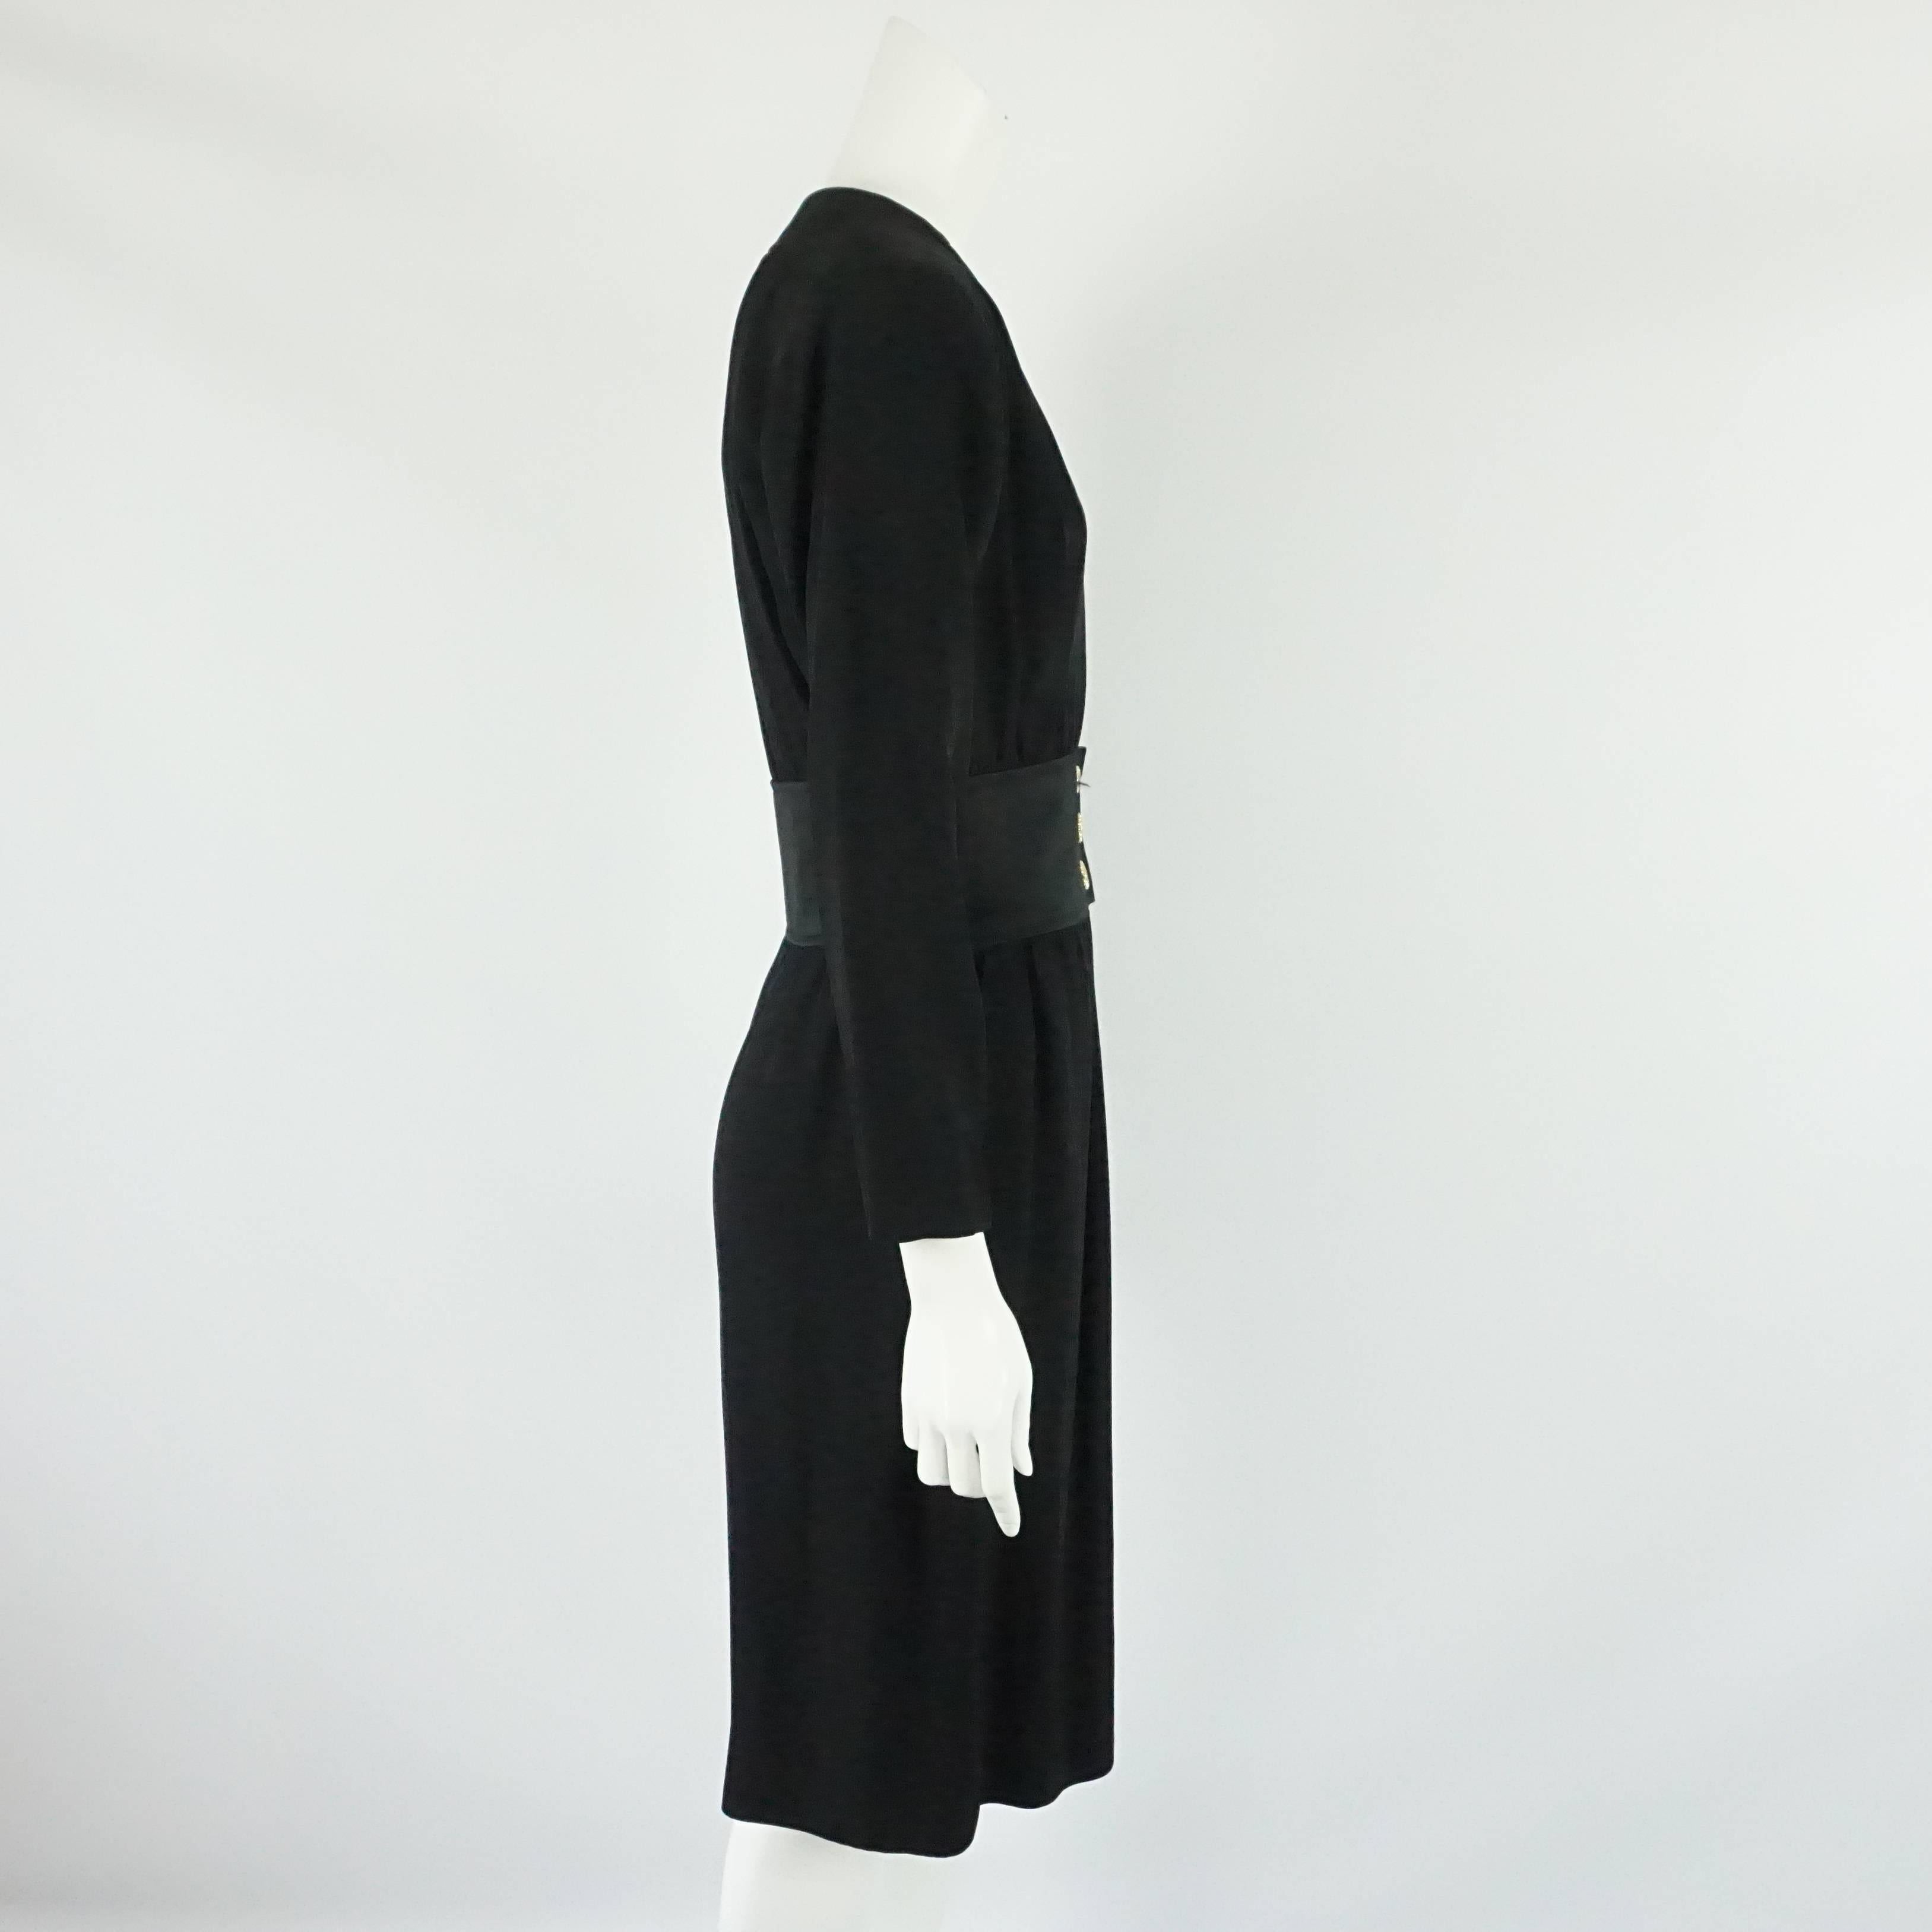 Yves Saint Laurent Black Wool Crepe Long Sleeve Dress-40-Circa 70's  This spectacular vintage YSL Dress has a low plunging neckline with a few hook and eyes to wear more closed if desired, it has a satin waistband, it has pleats on the shoulder